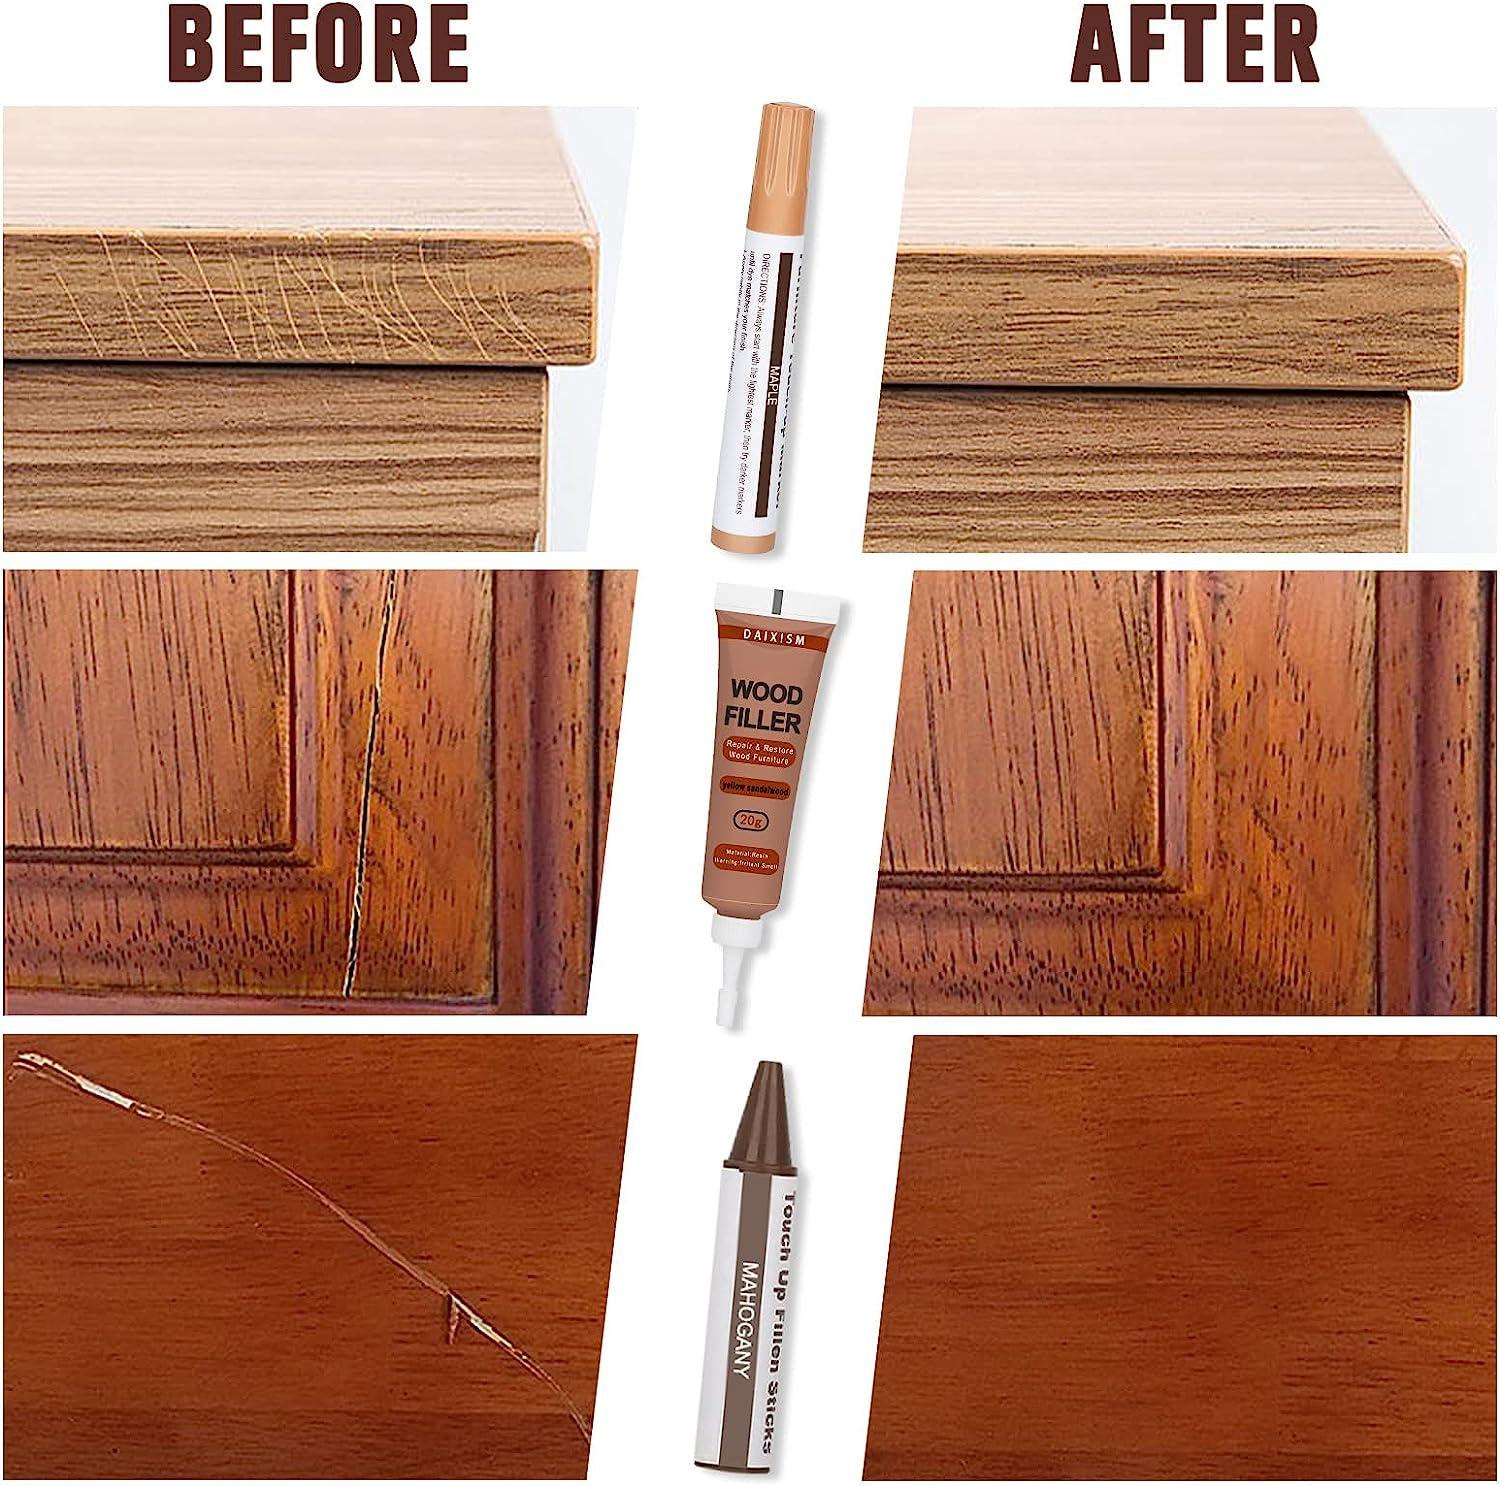 DAIXISM Wood Repair Kit Restore Any Wood Furniture, 20 Colors Resin Repair  Compounds Cover Surface Scratch for Stains, Scratches, Floors, Tables